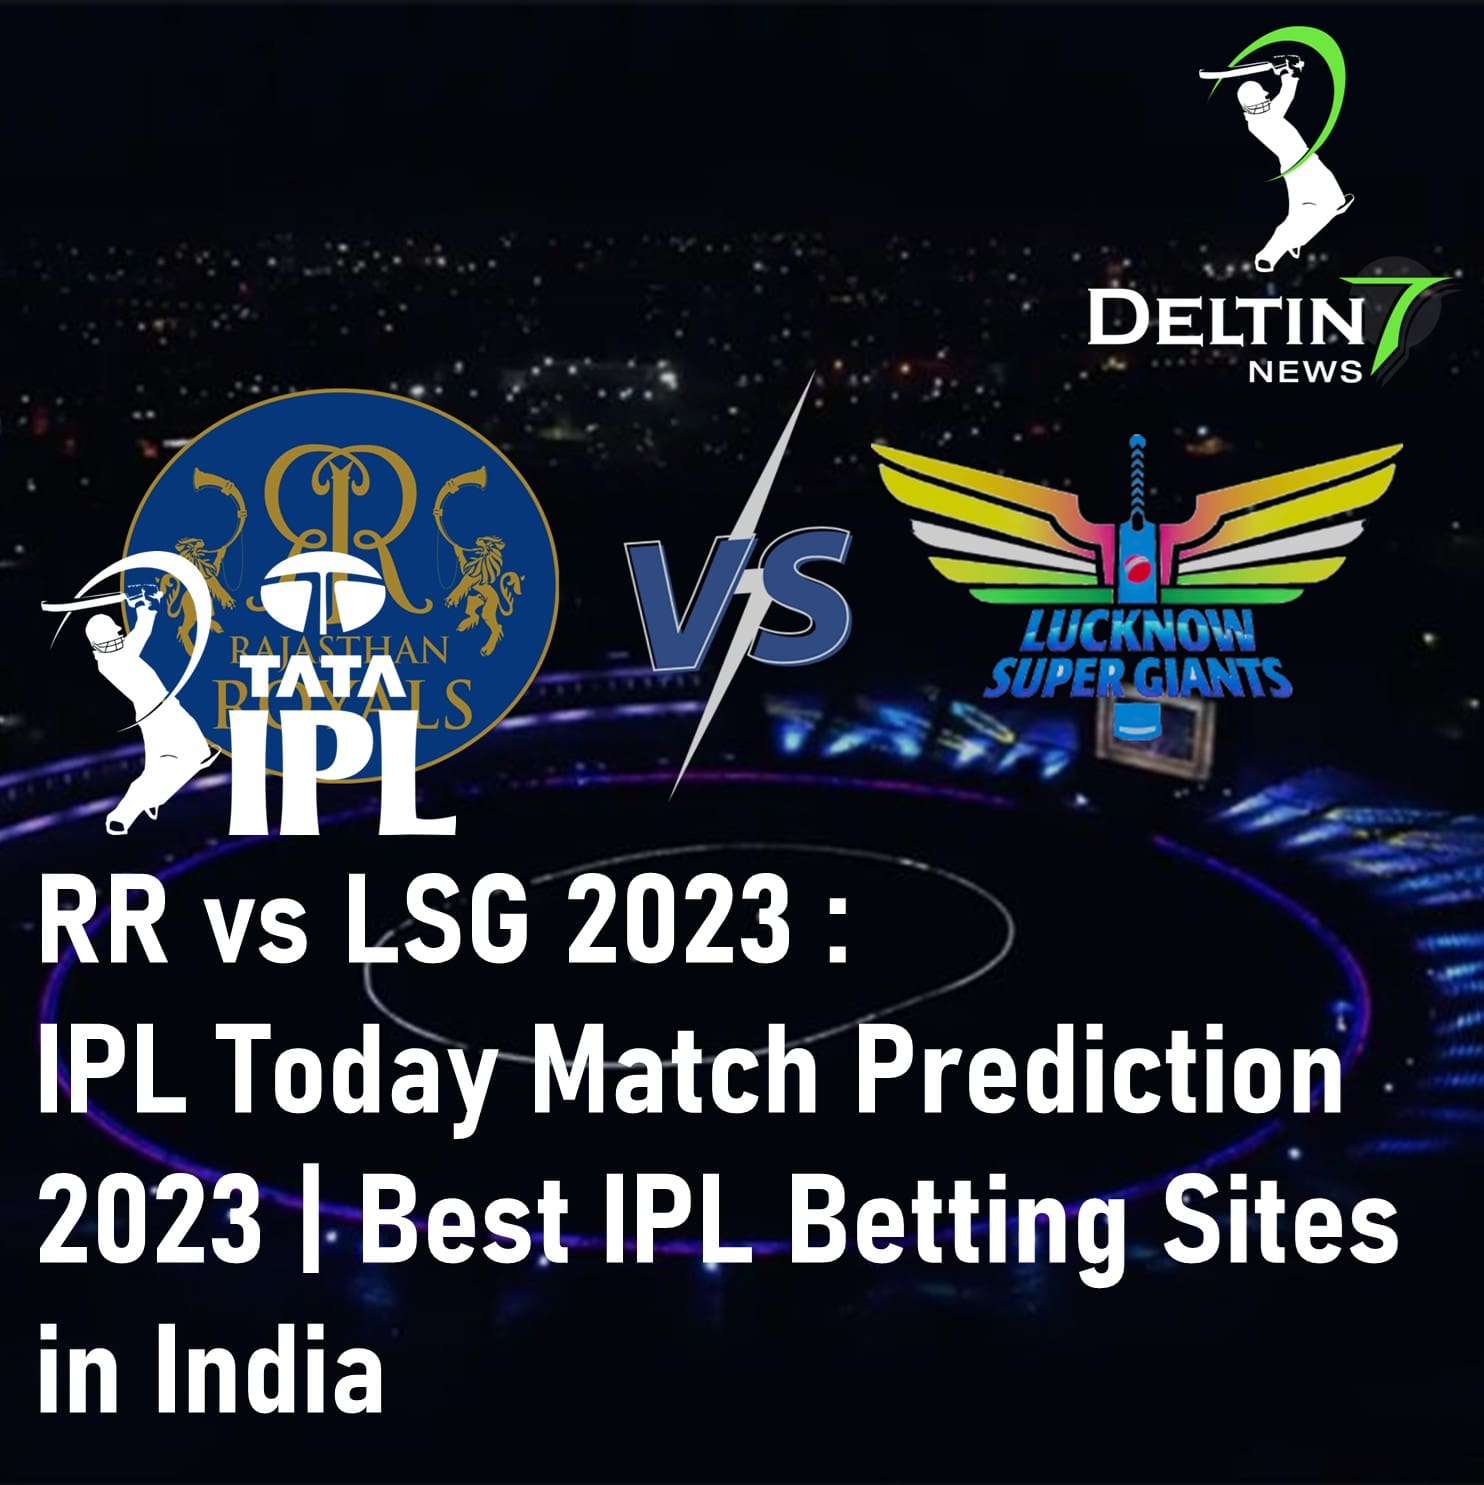 RR vs LSG 2023 IPL Today Match Prediction 2023 Best IPL Betting Sites in India